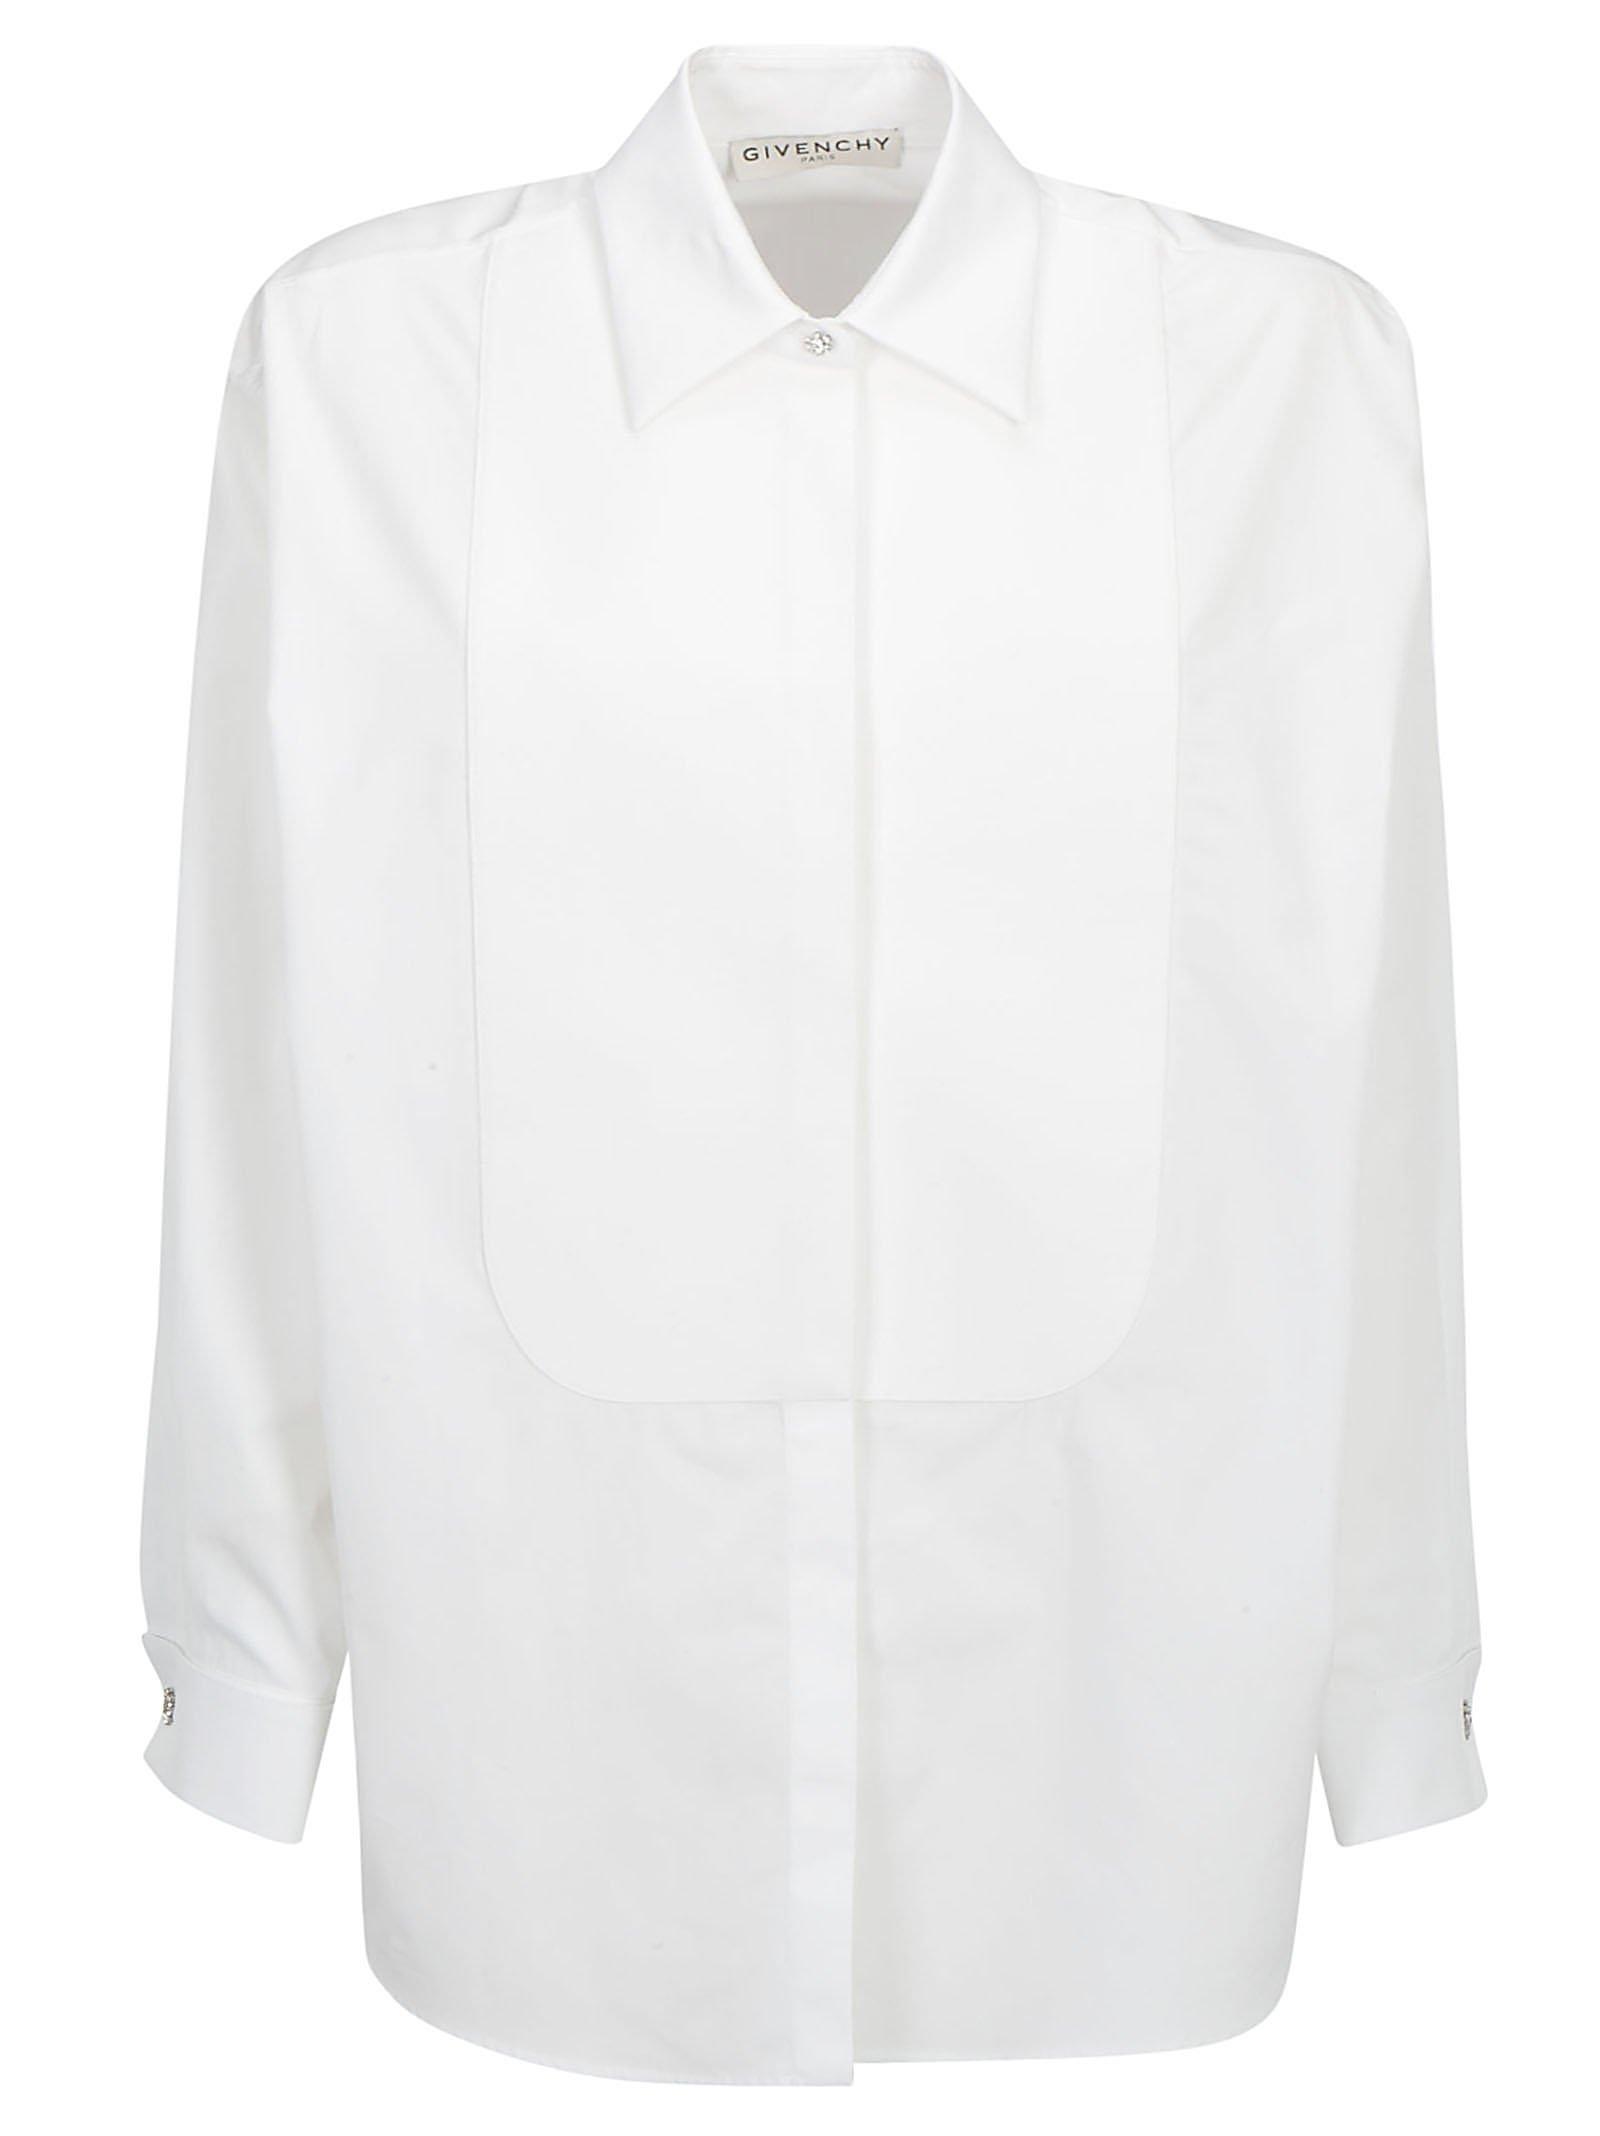 Givenchy Cotton Long Sleeved Buttoned Shirt in White - Lyst